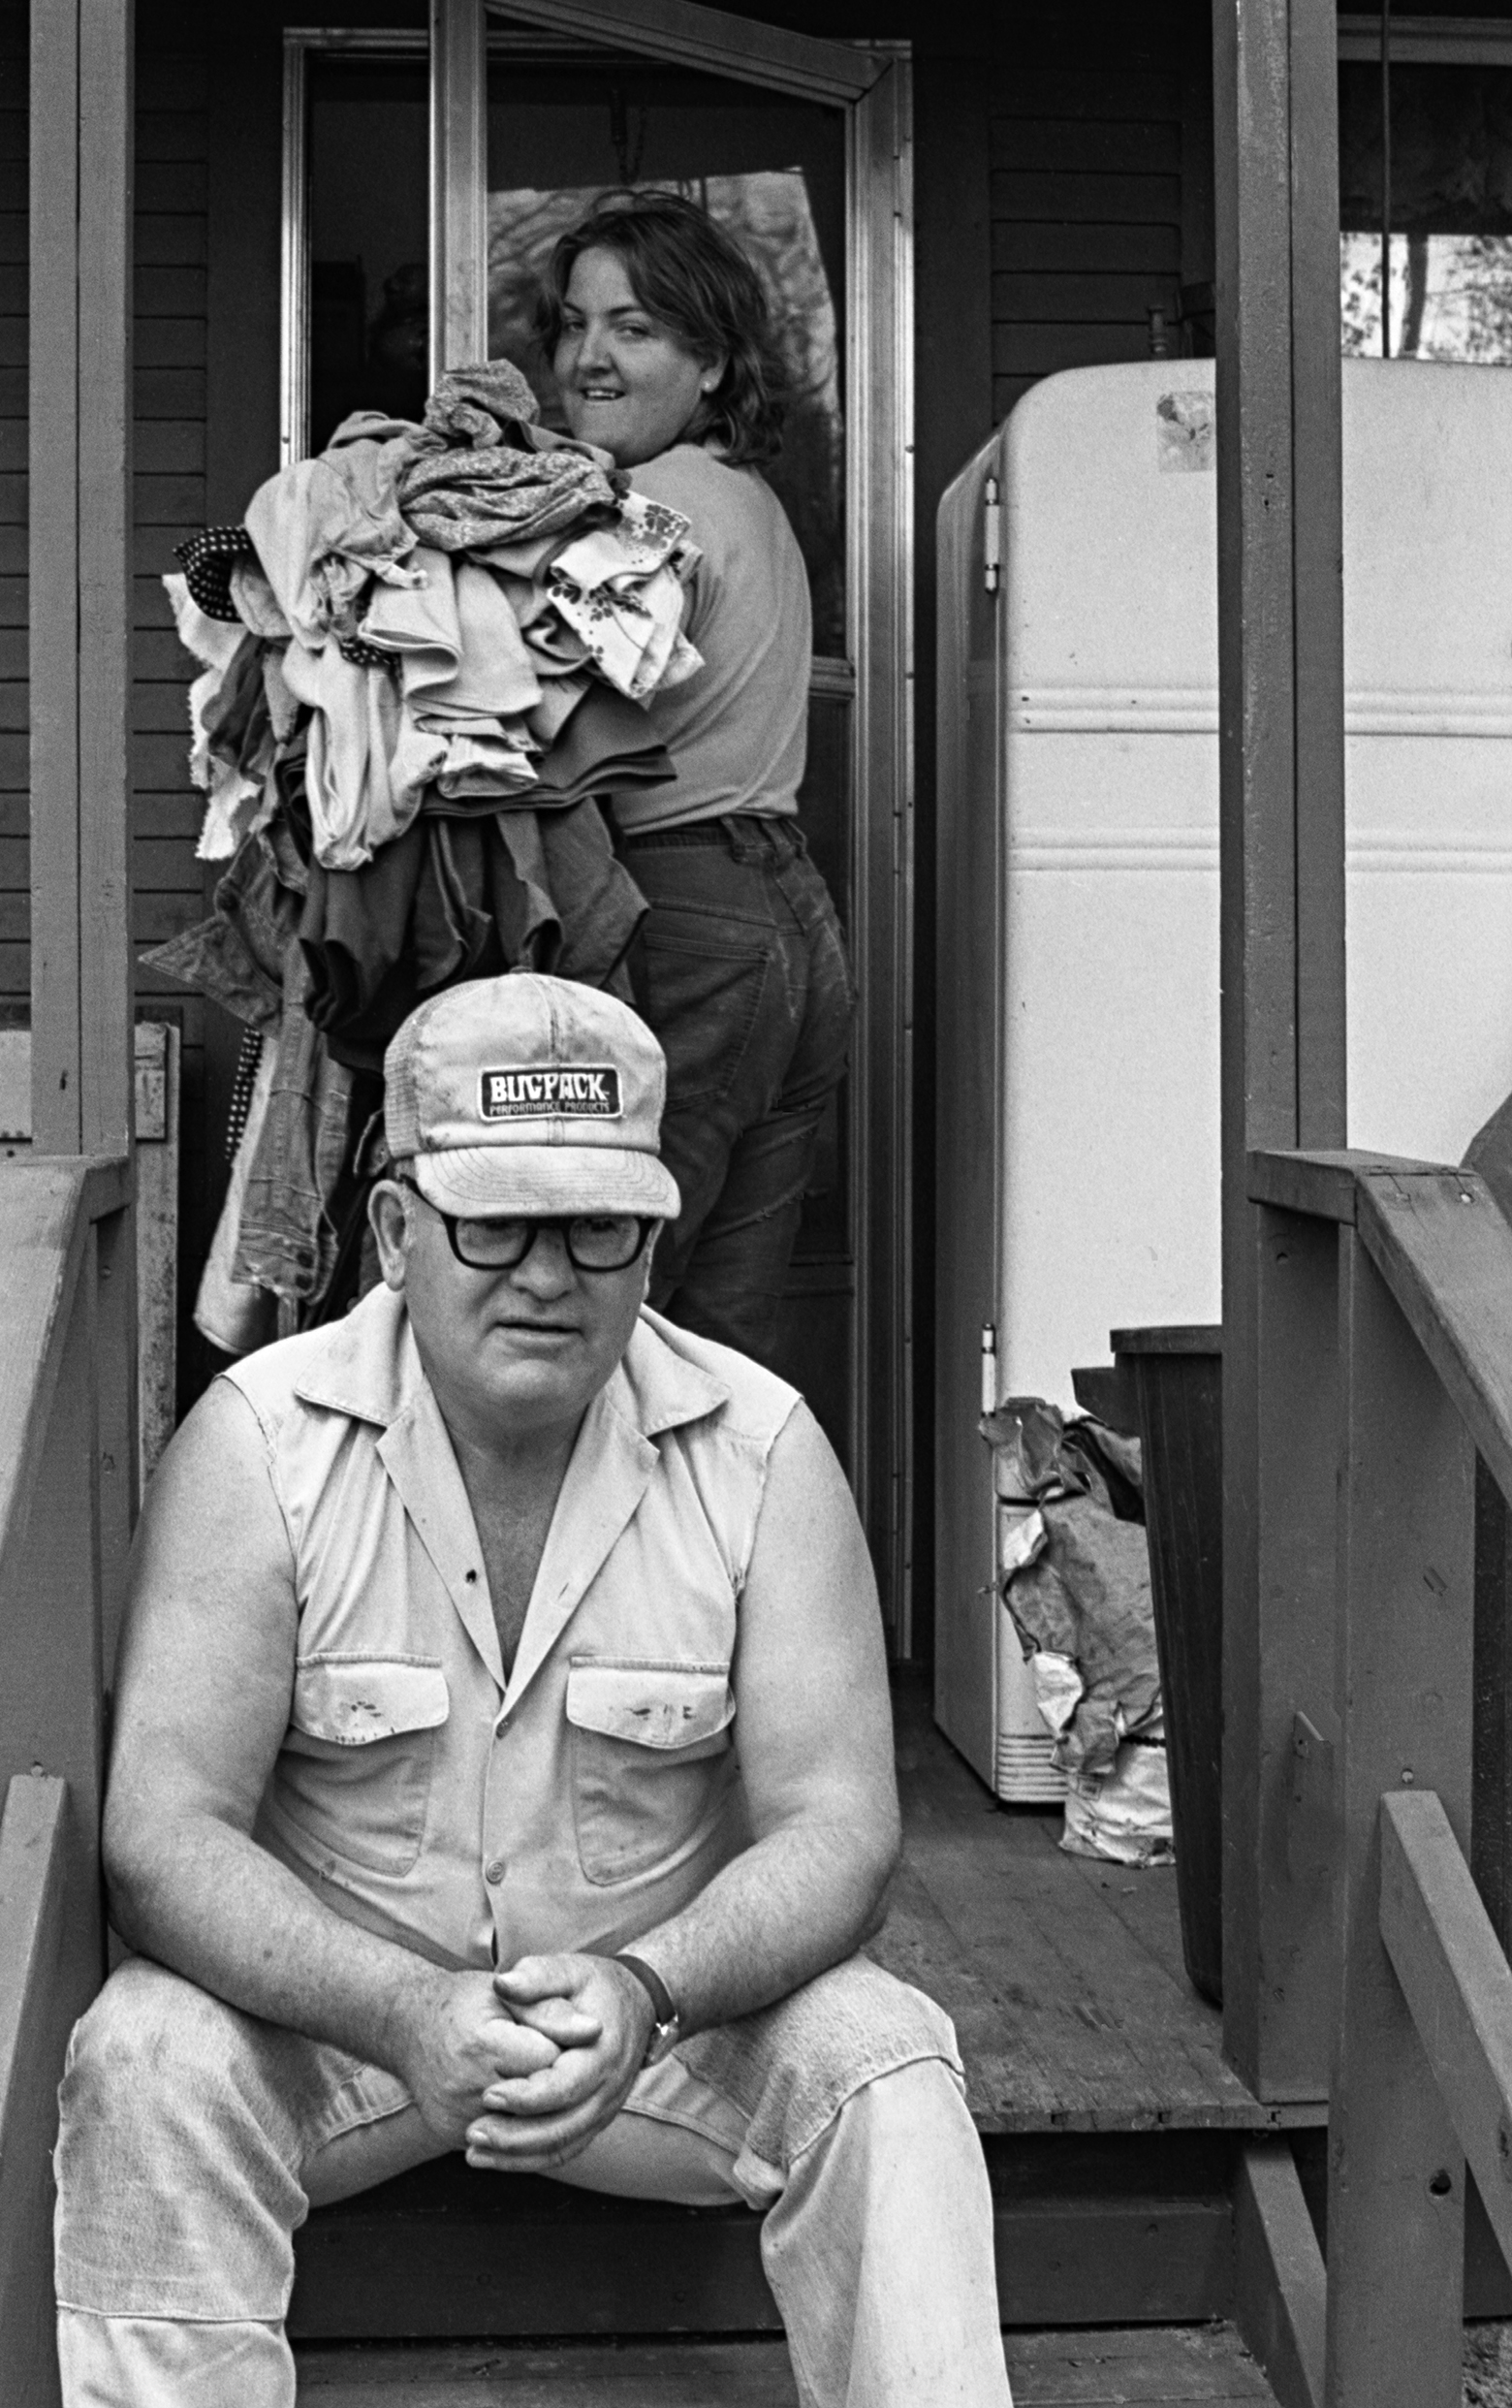 A man with a Bugpack cap and glasses sits on the top step of a porch facing the camera with his elbows resting on his knees. A woman behind him looks over her shoulder at him as she opens a door while carrying laundry. The porch has a refrigerator on it.